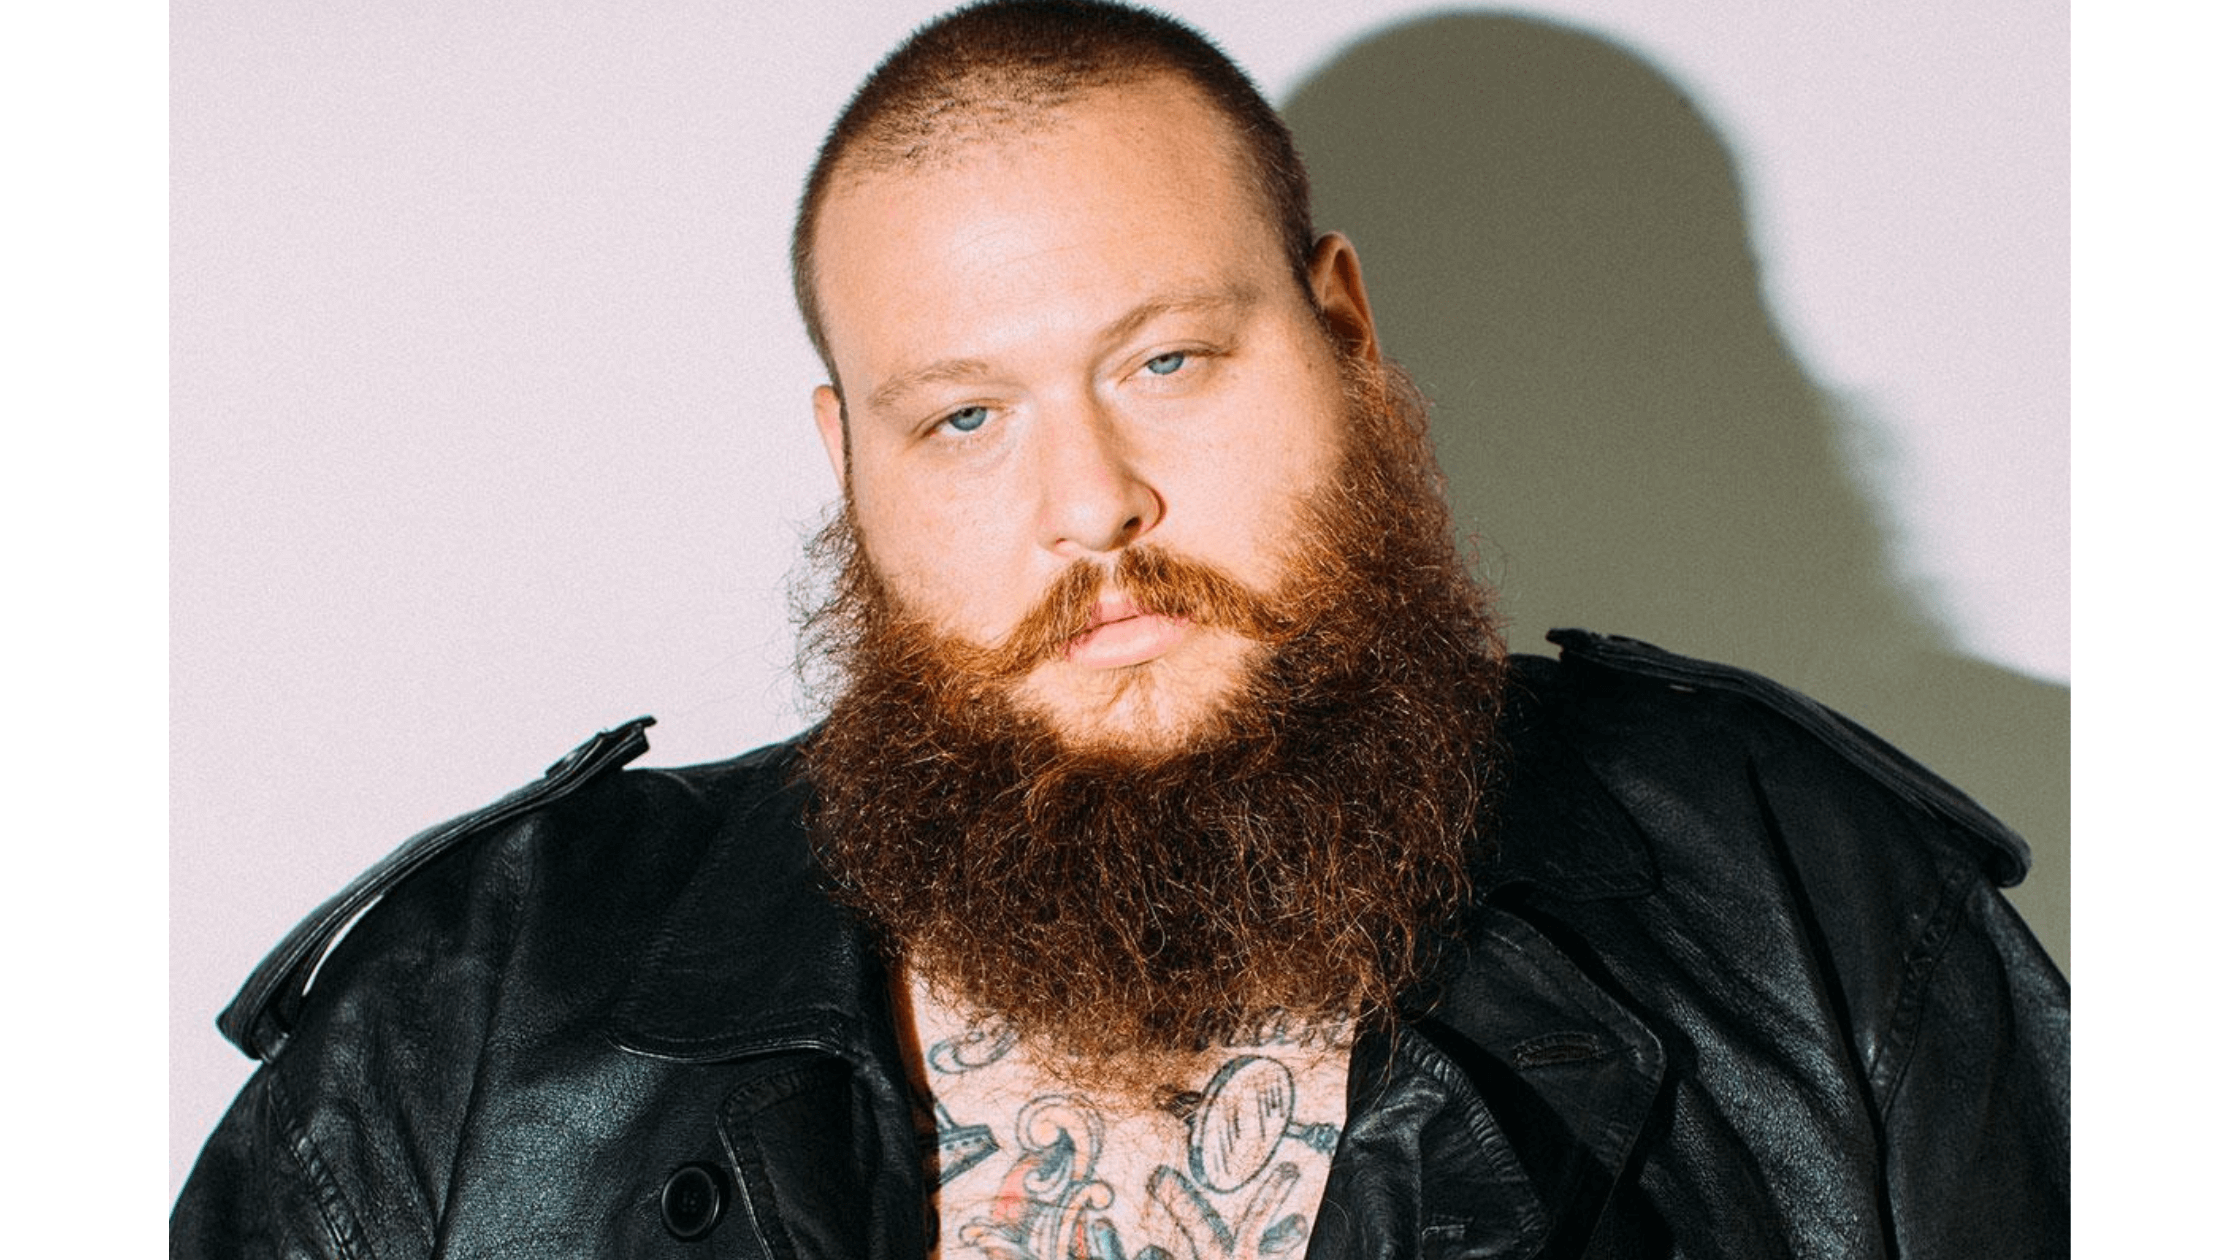 Action-Bronson-Shed-127-Pounds-Of-His-Weight-In-9-Months-1